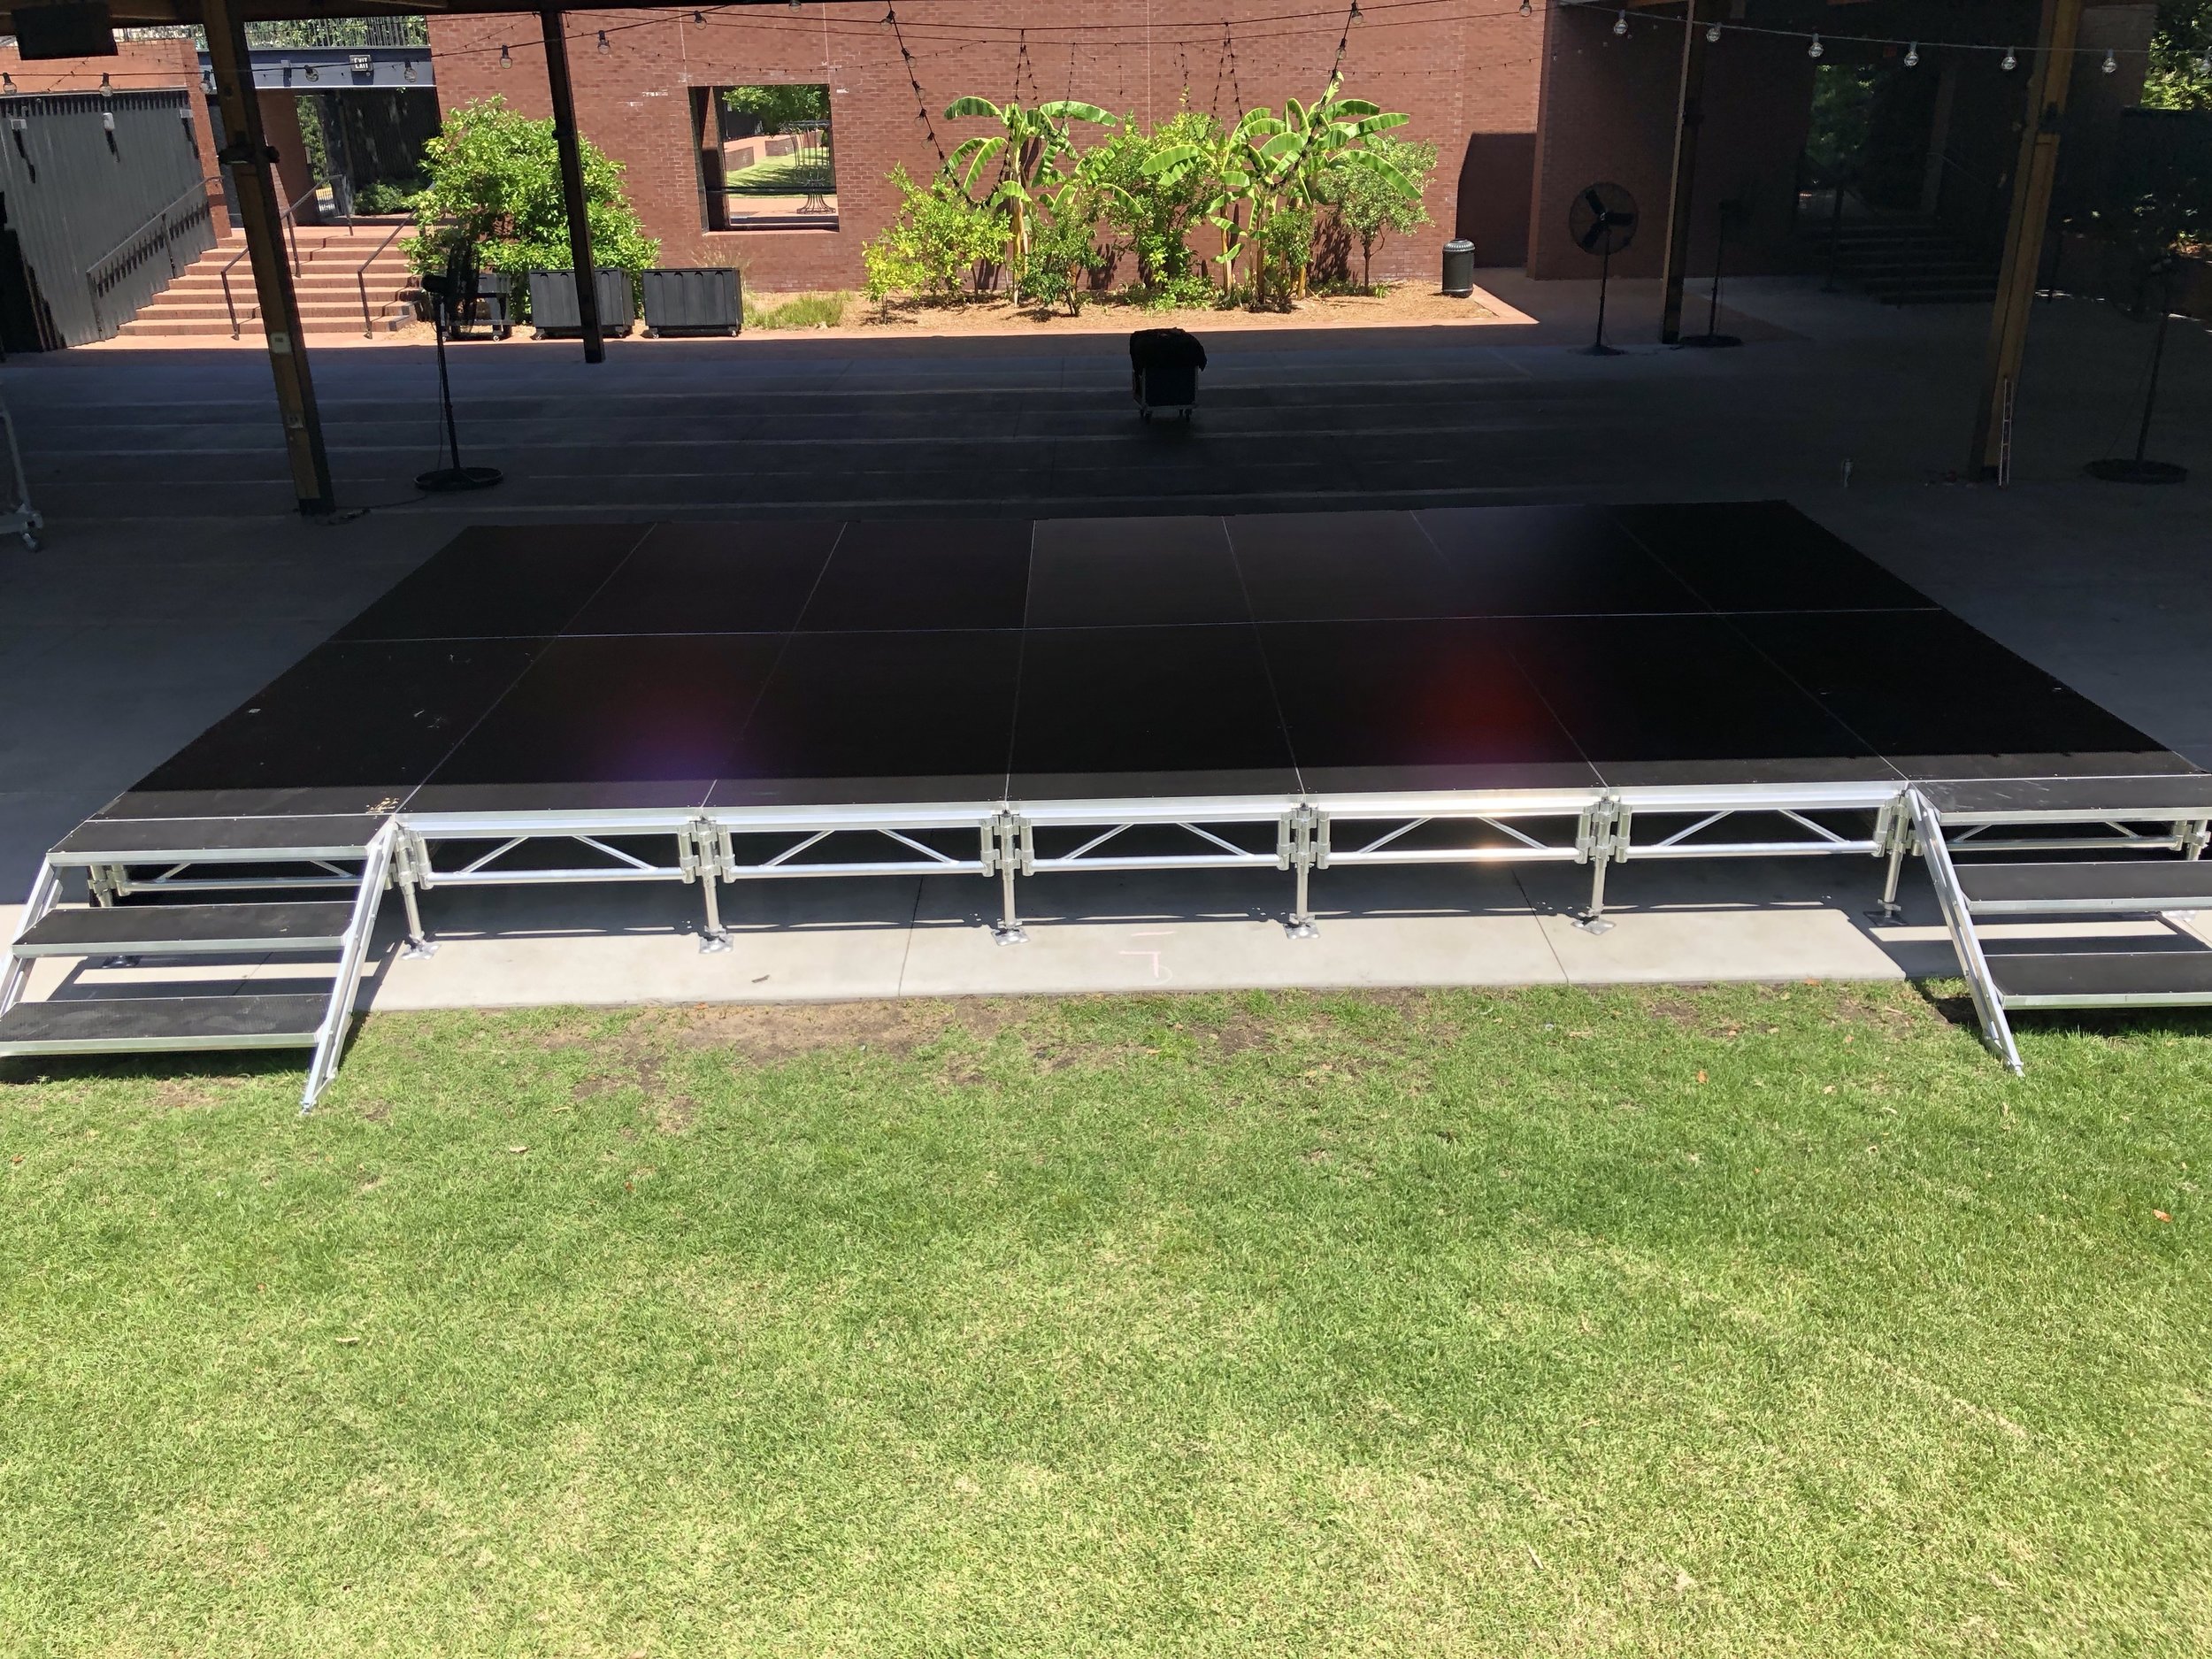 16x28 Stage (4x8 Sections)